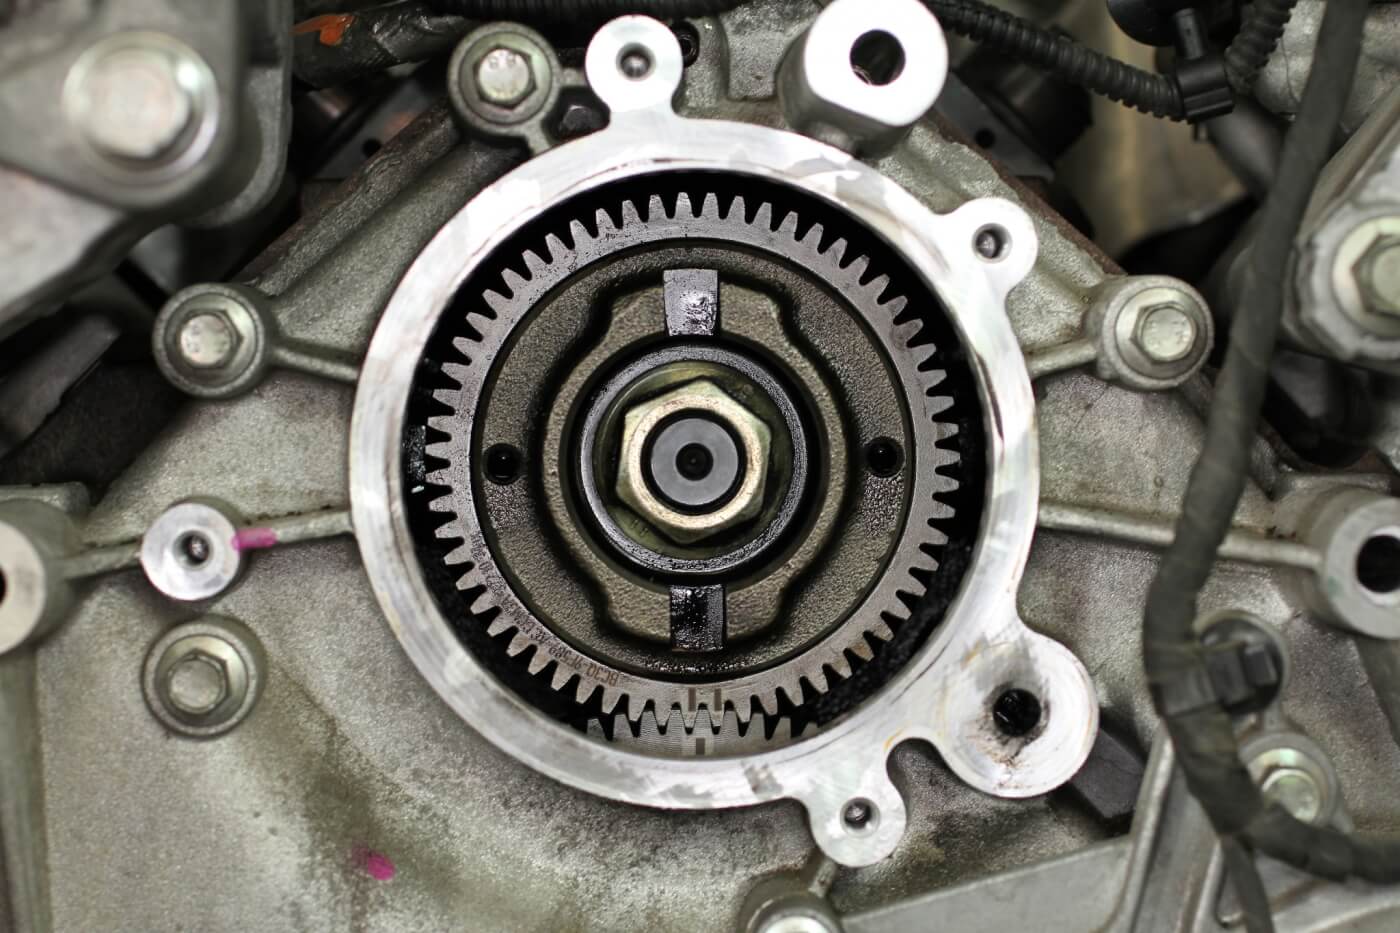 13A/13B. The high-pressure fuel pump is timed with the cam. It’s essential that this pump be installed properly or truck won’t run. The two marks on the cam and drive gear must be in the proper position before installing your new pump. 